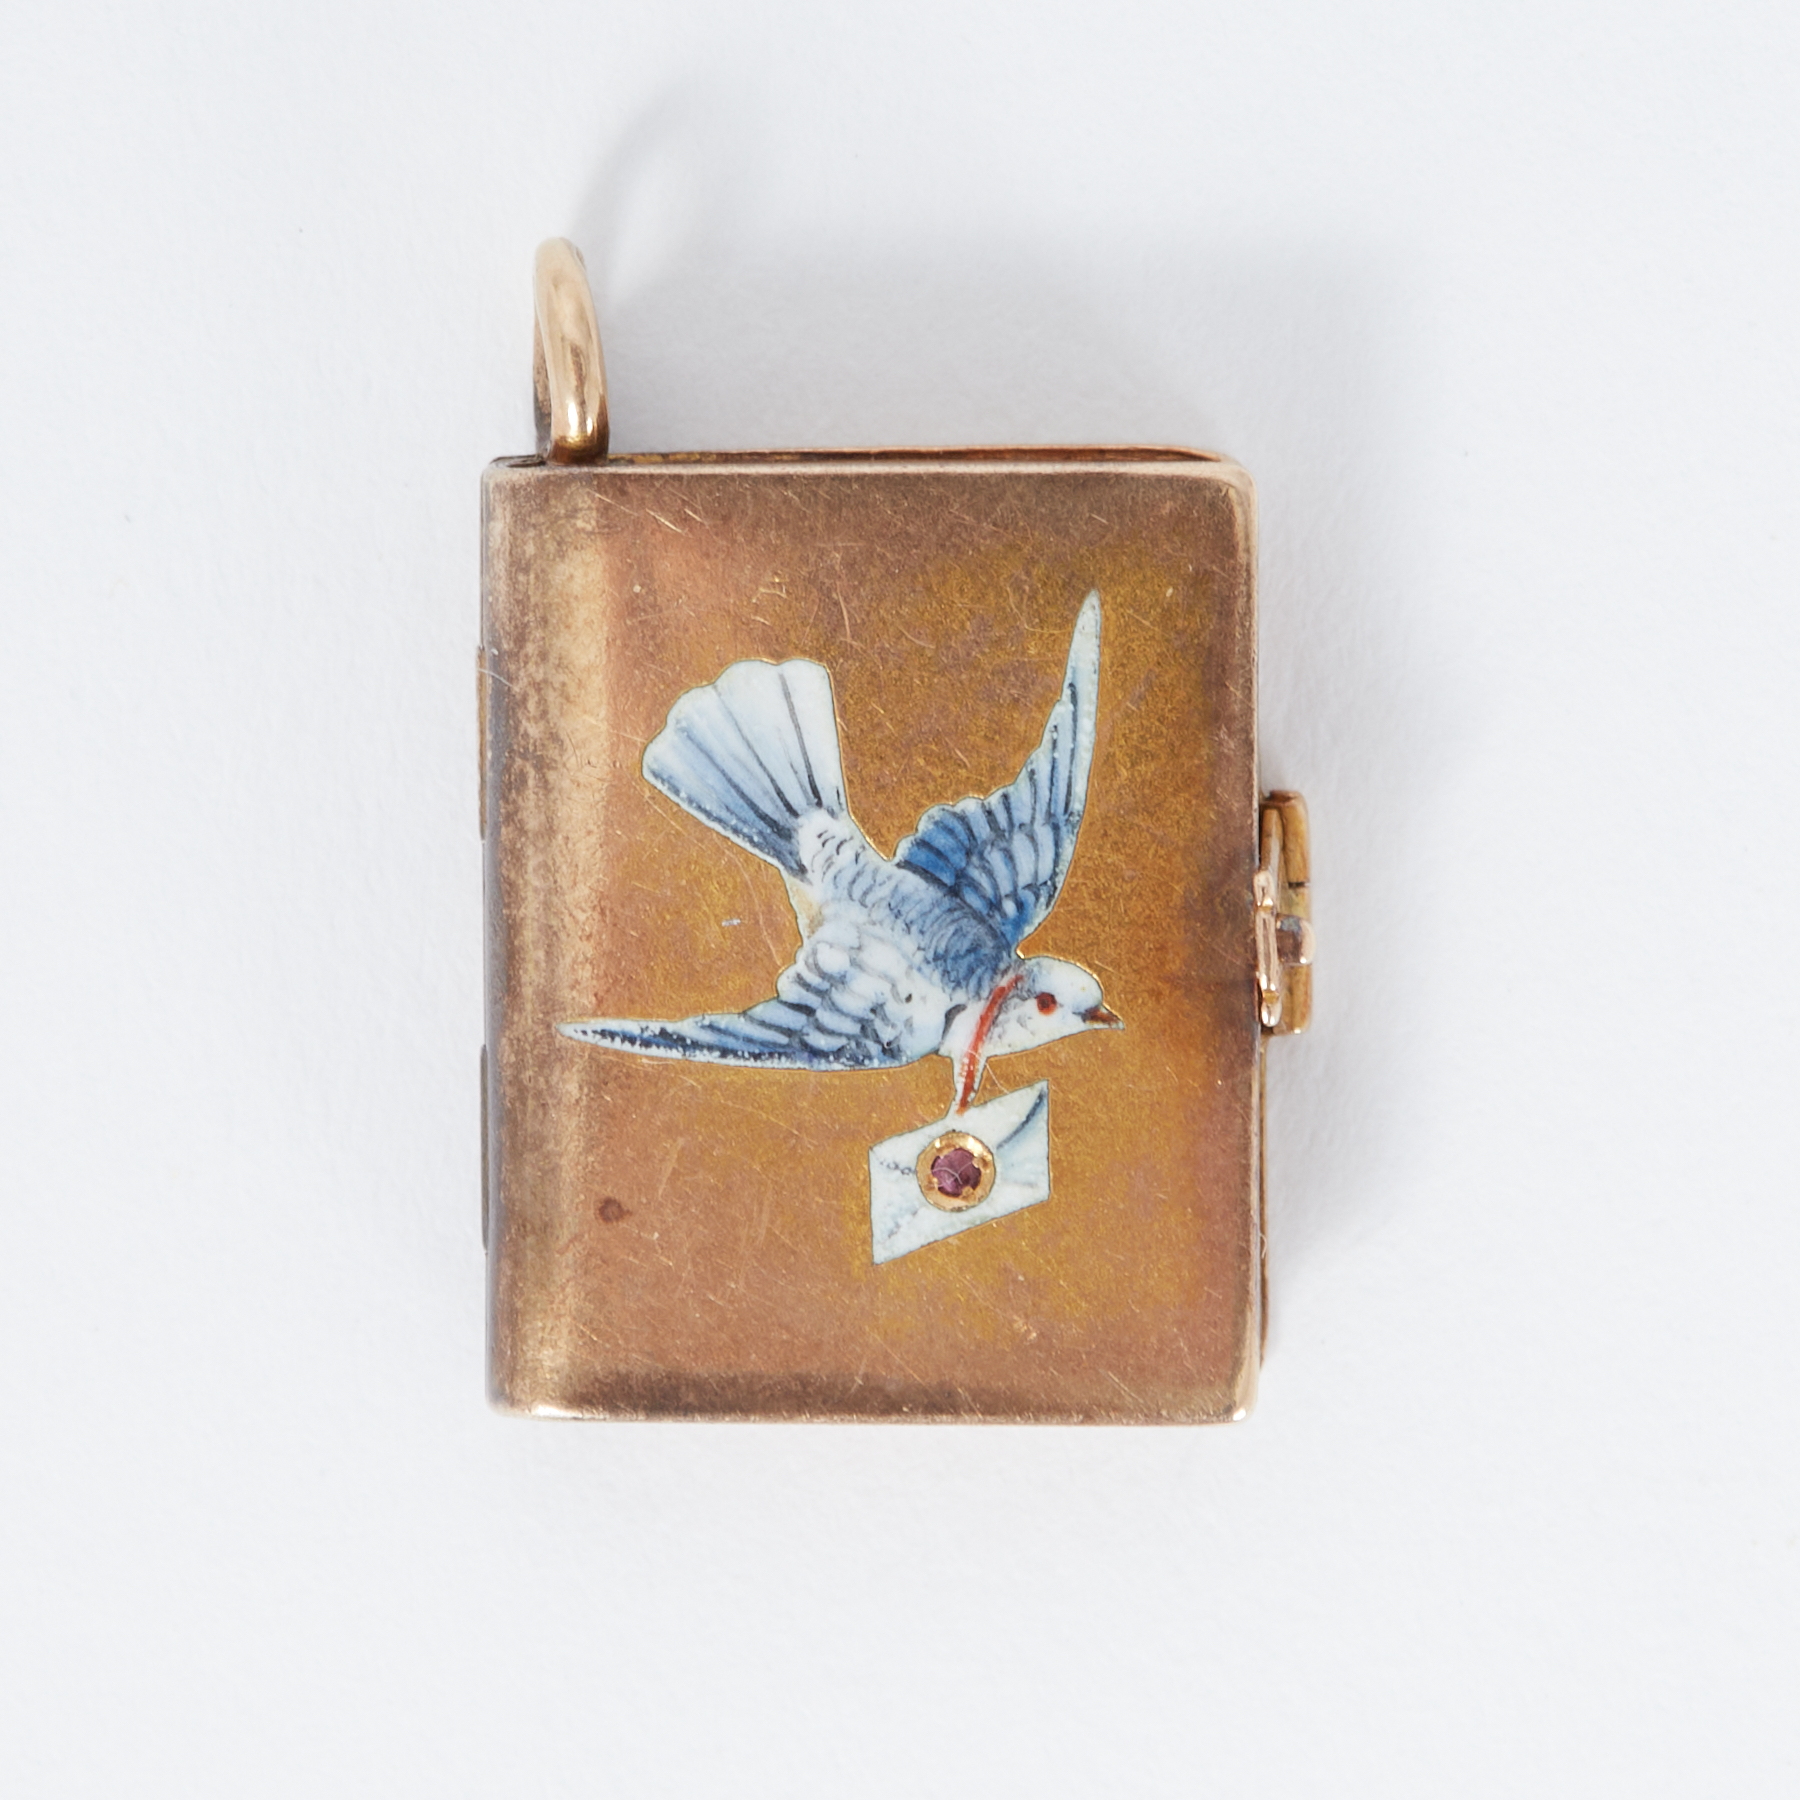 A gold locket in the shape of a book inset with a Dove & envelope set with a small ruby, measuring